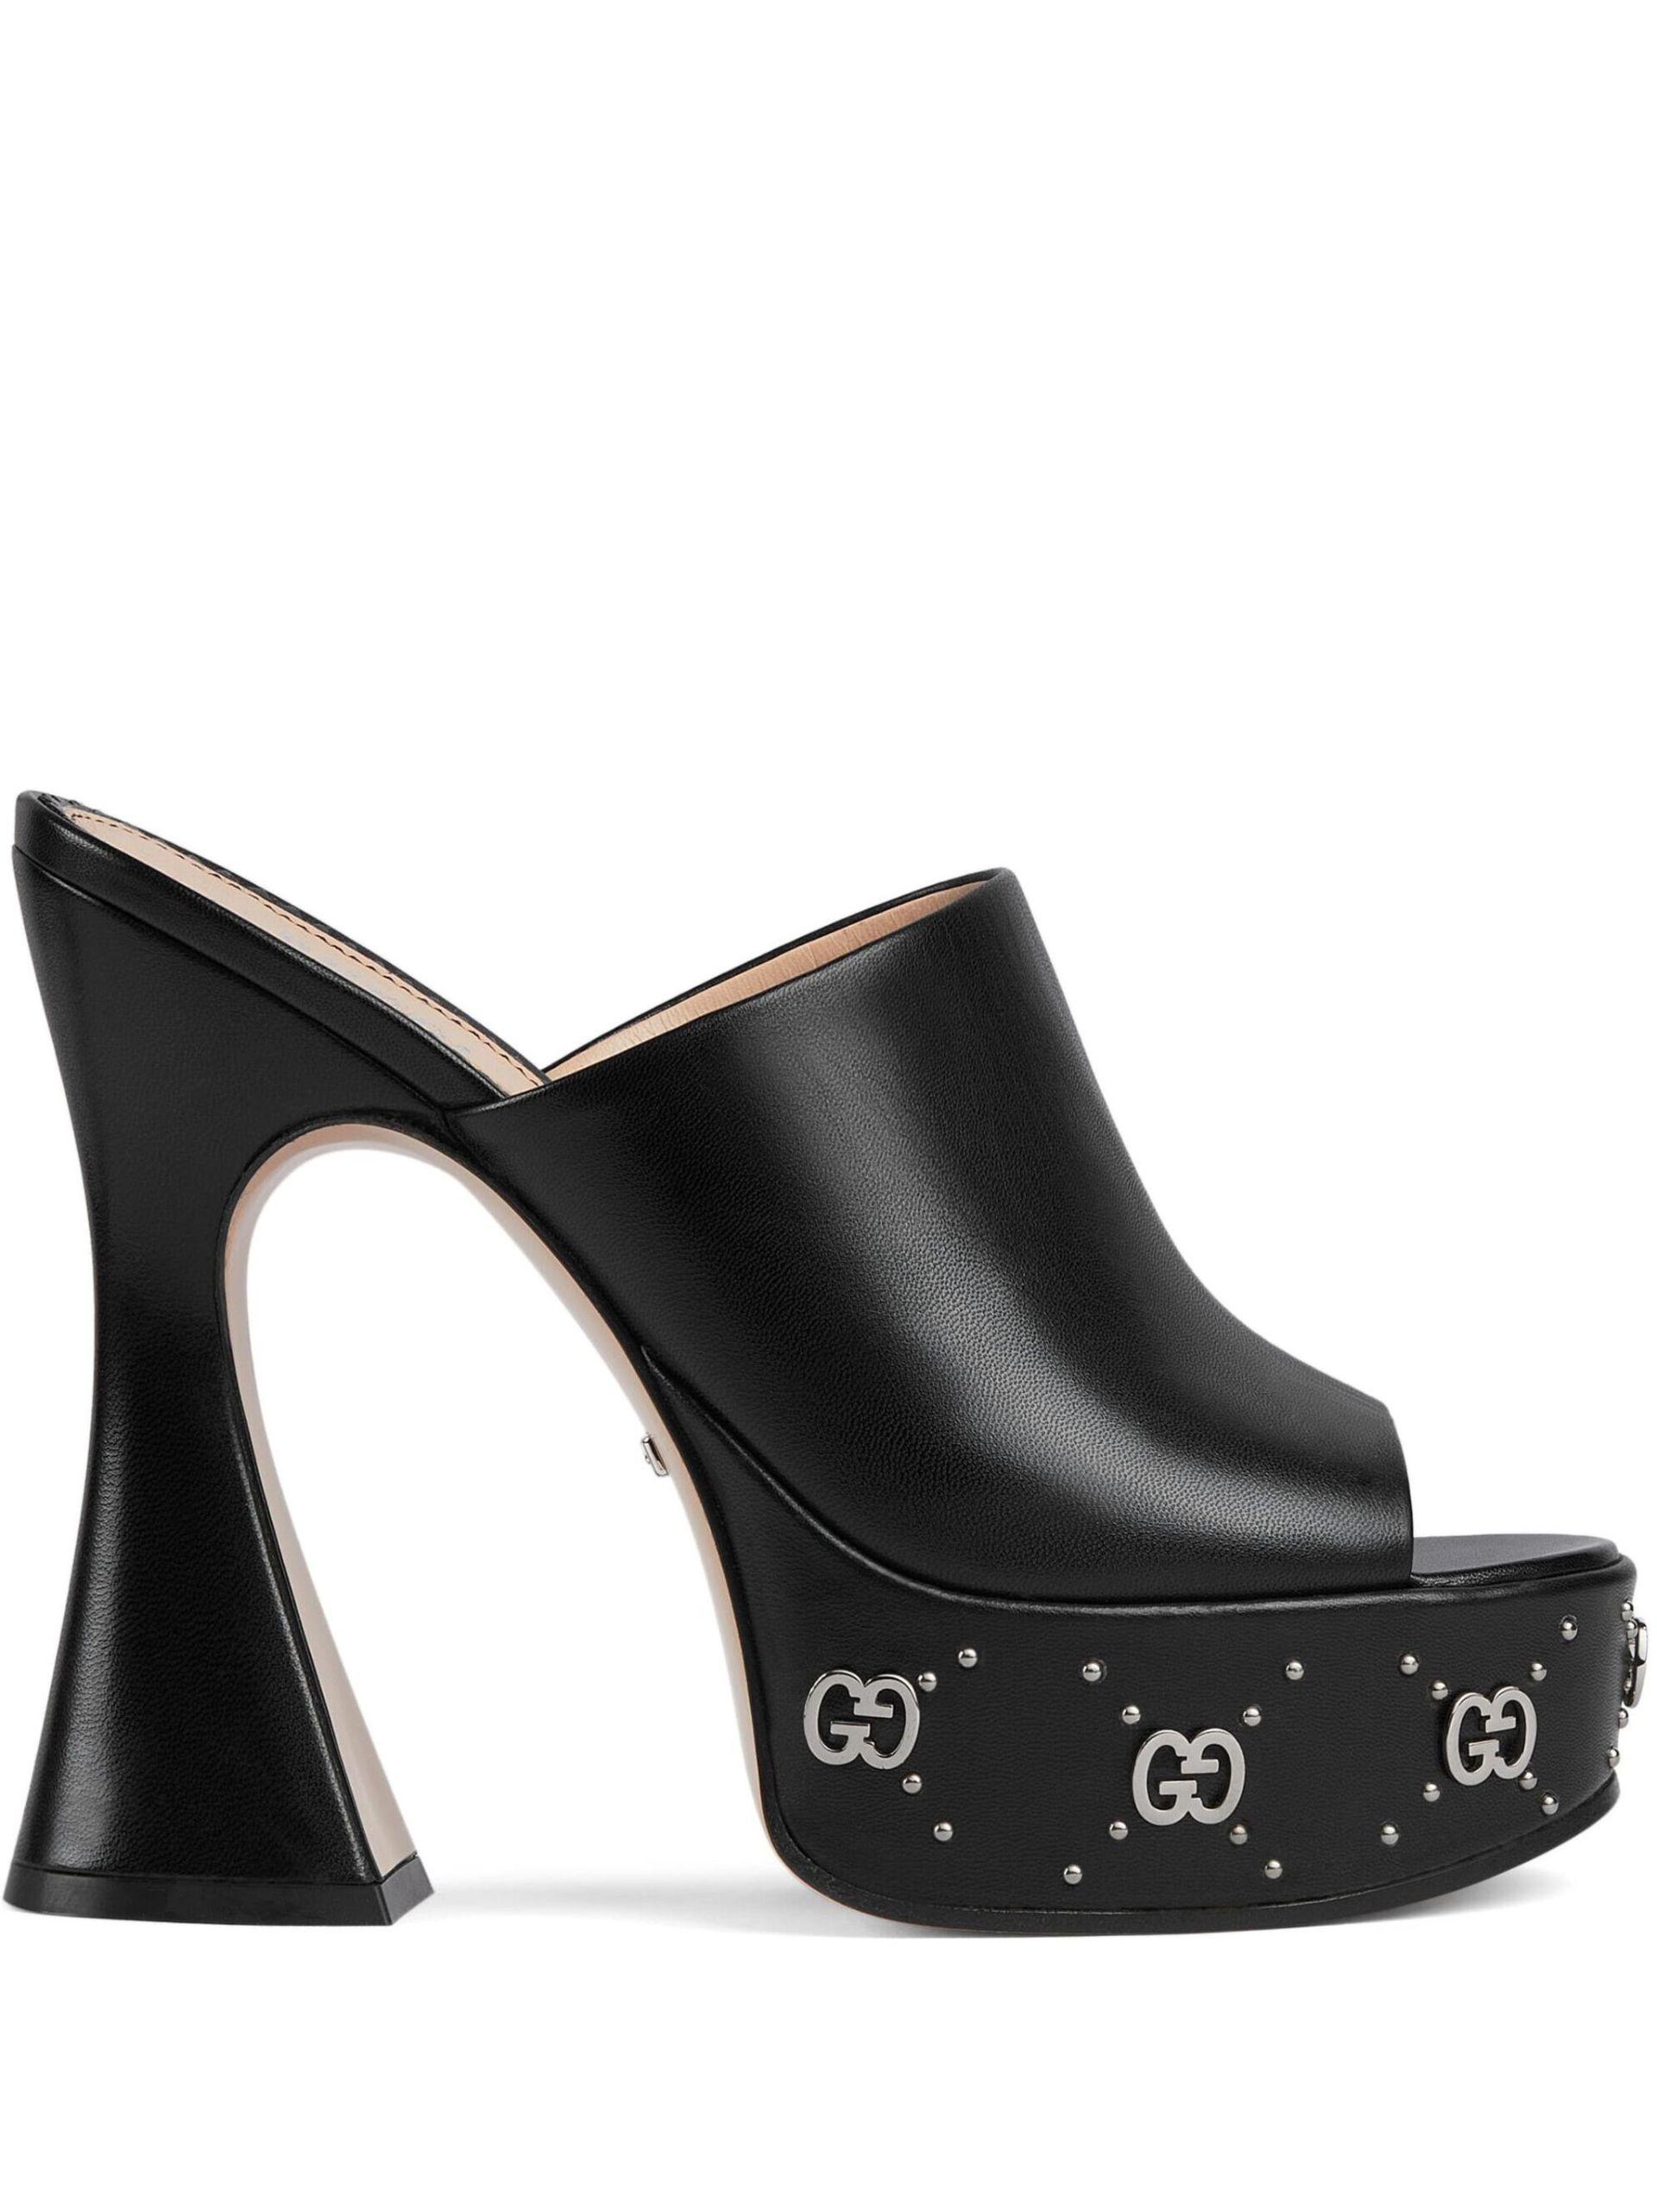 Gucci Leather Platform Mules 115 in Black | Lyst